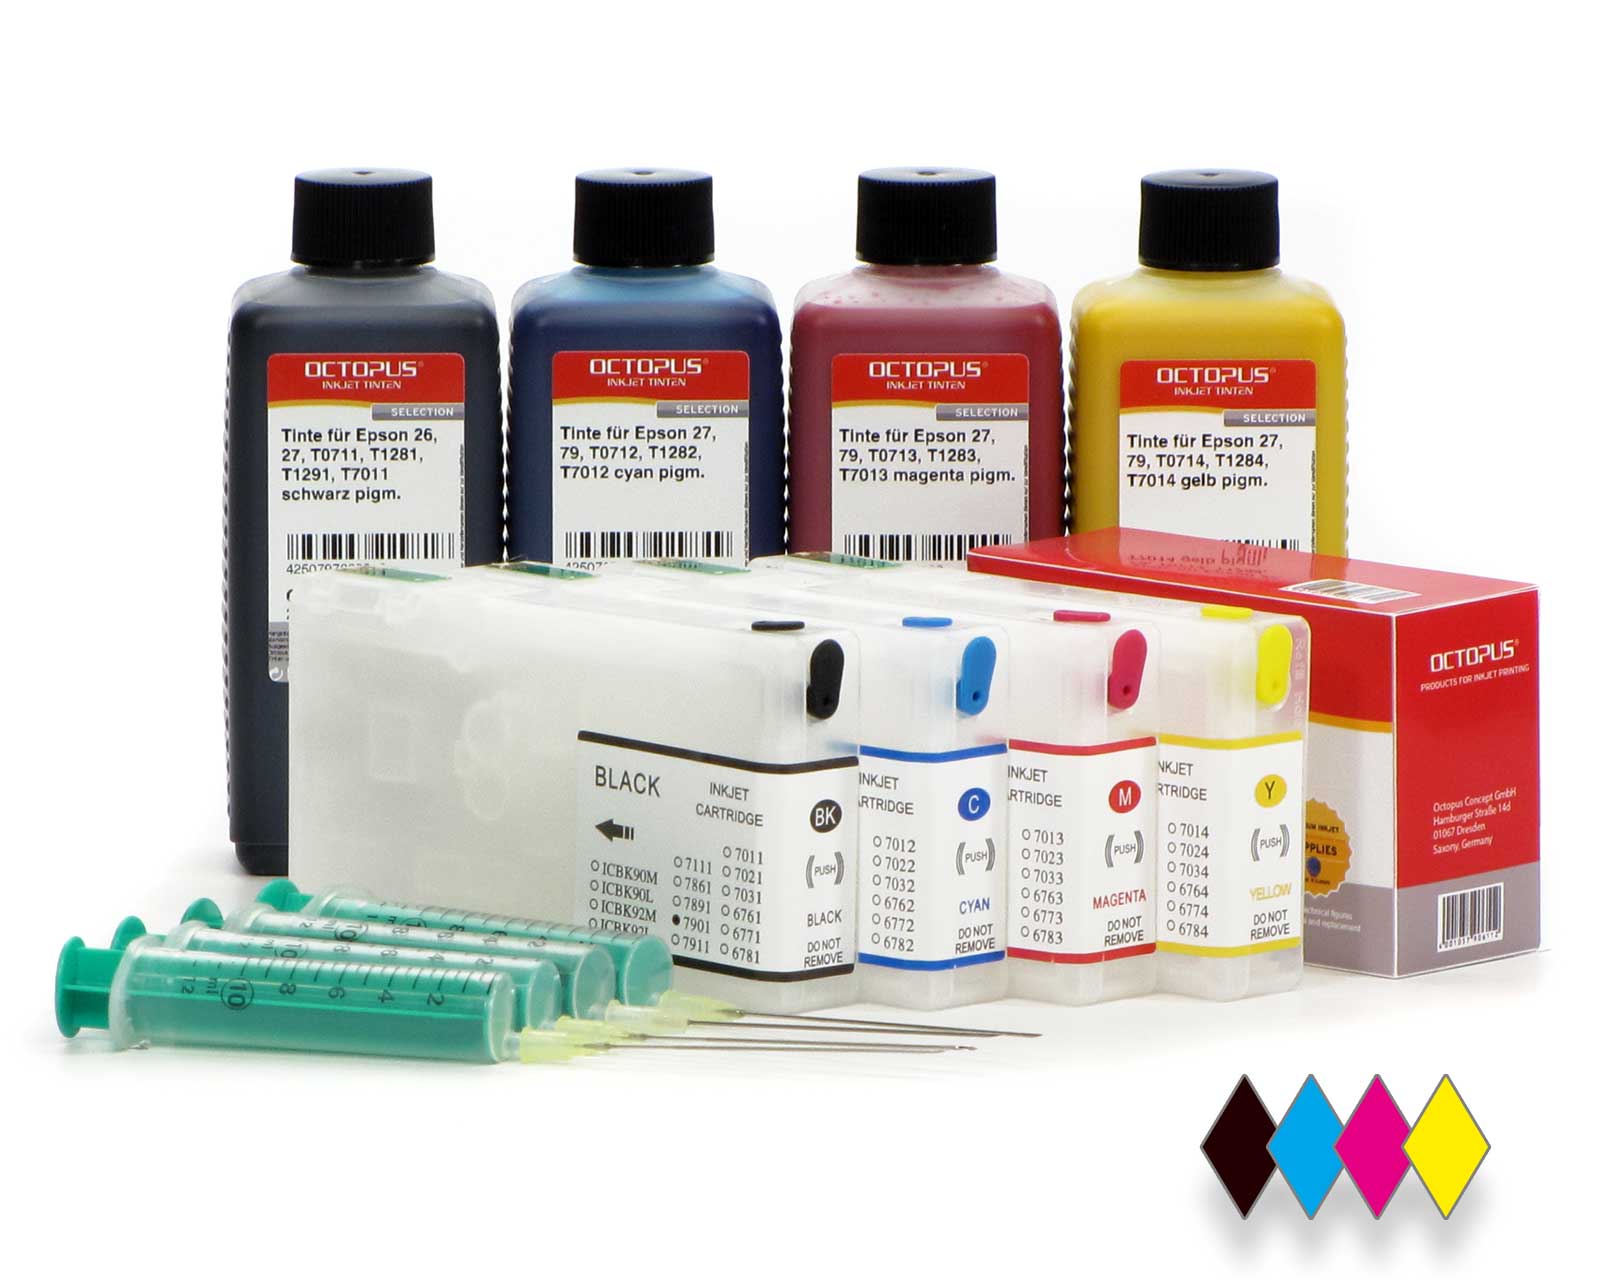 Refillable cartridges for Epson 79 with auto reset chips and 4x of ink